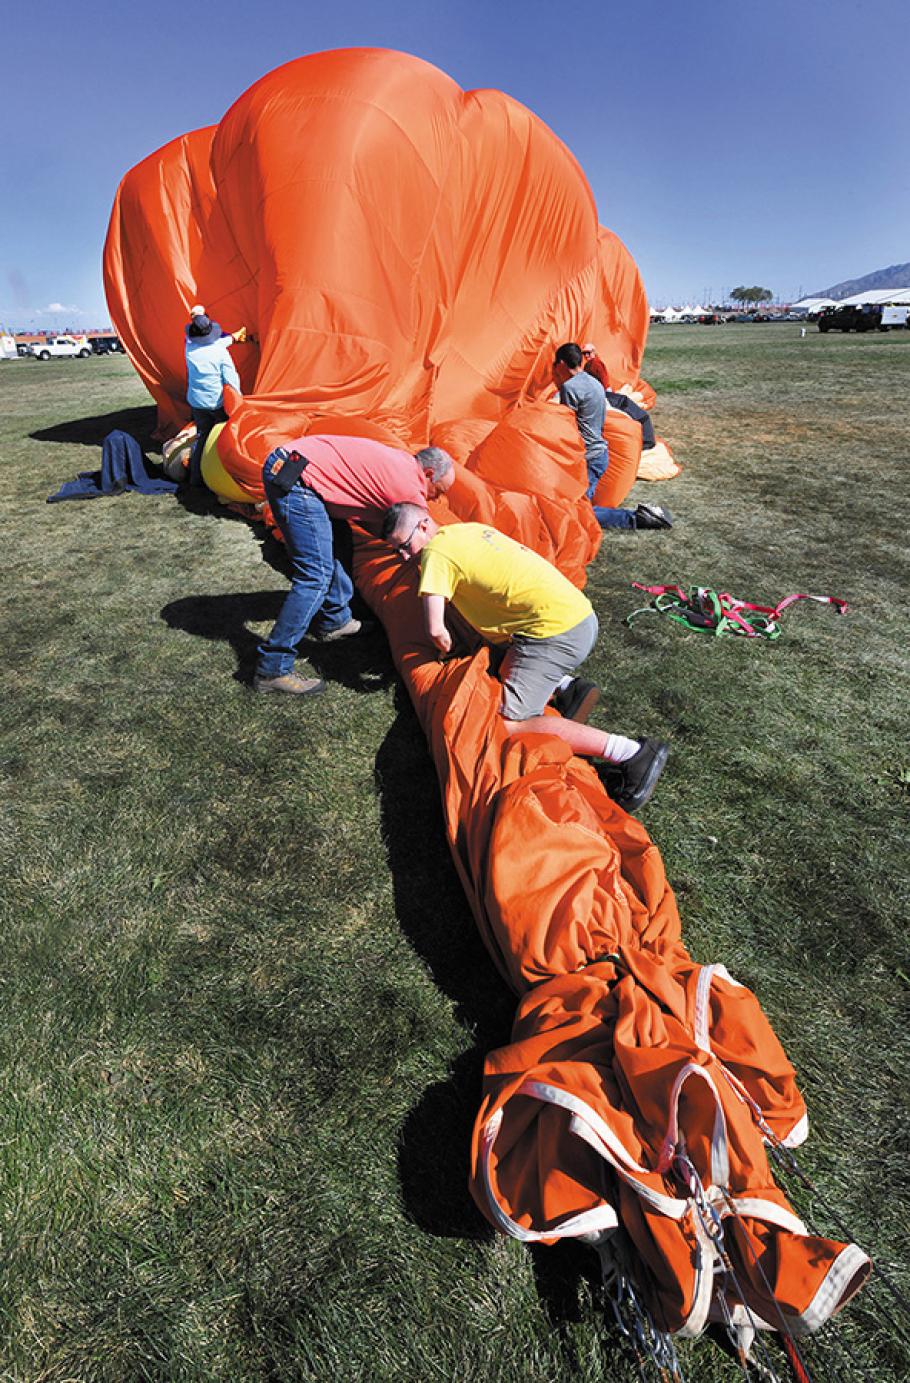 The partially-deflated envelope of a brightly-colored balloon is stretched out on the grass as four people work to squeeze out the remaining air, under the direction of middle-age white man standing off to the side.